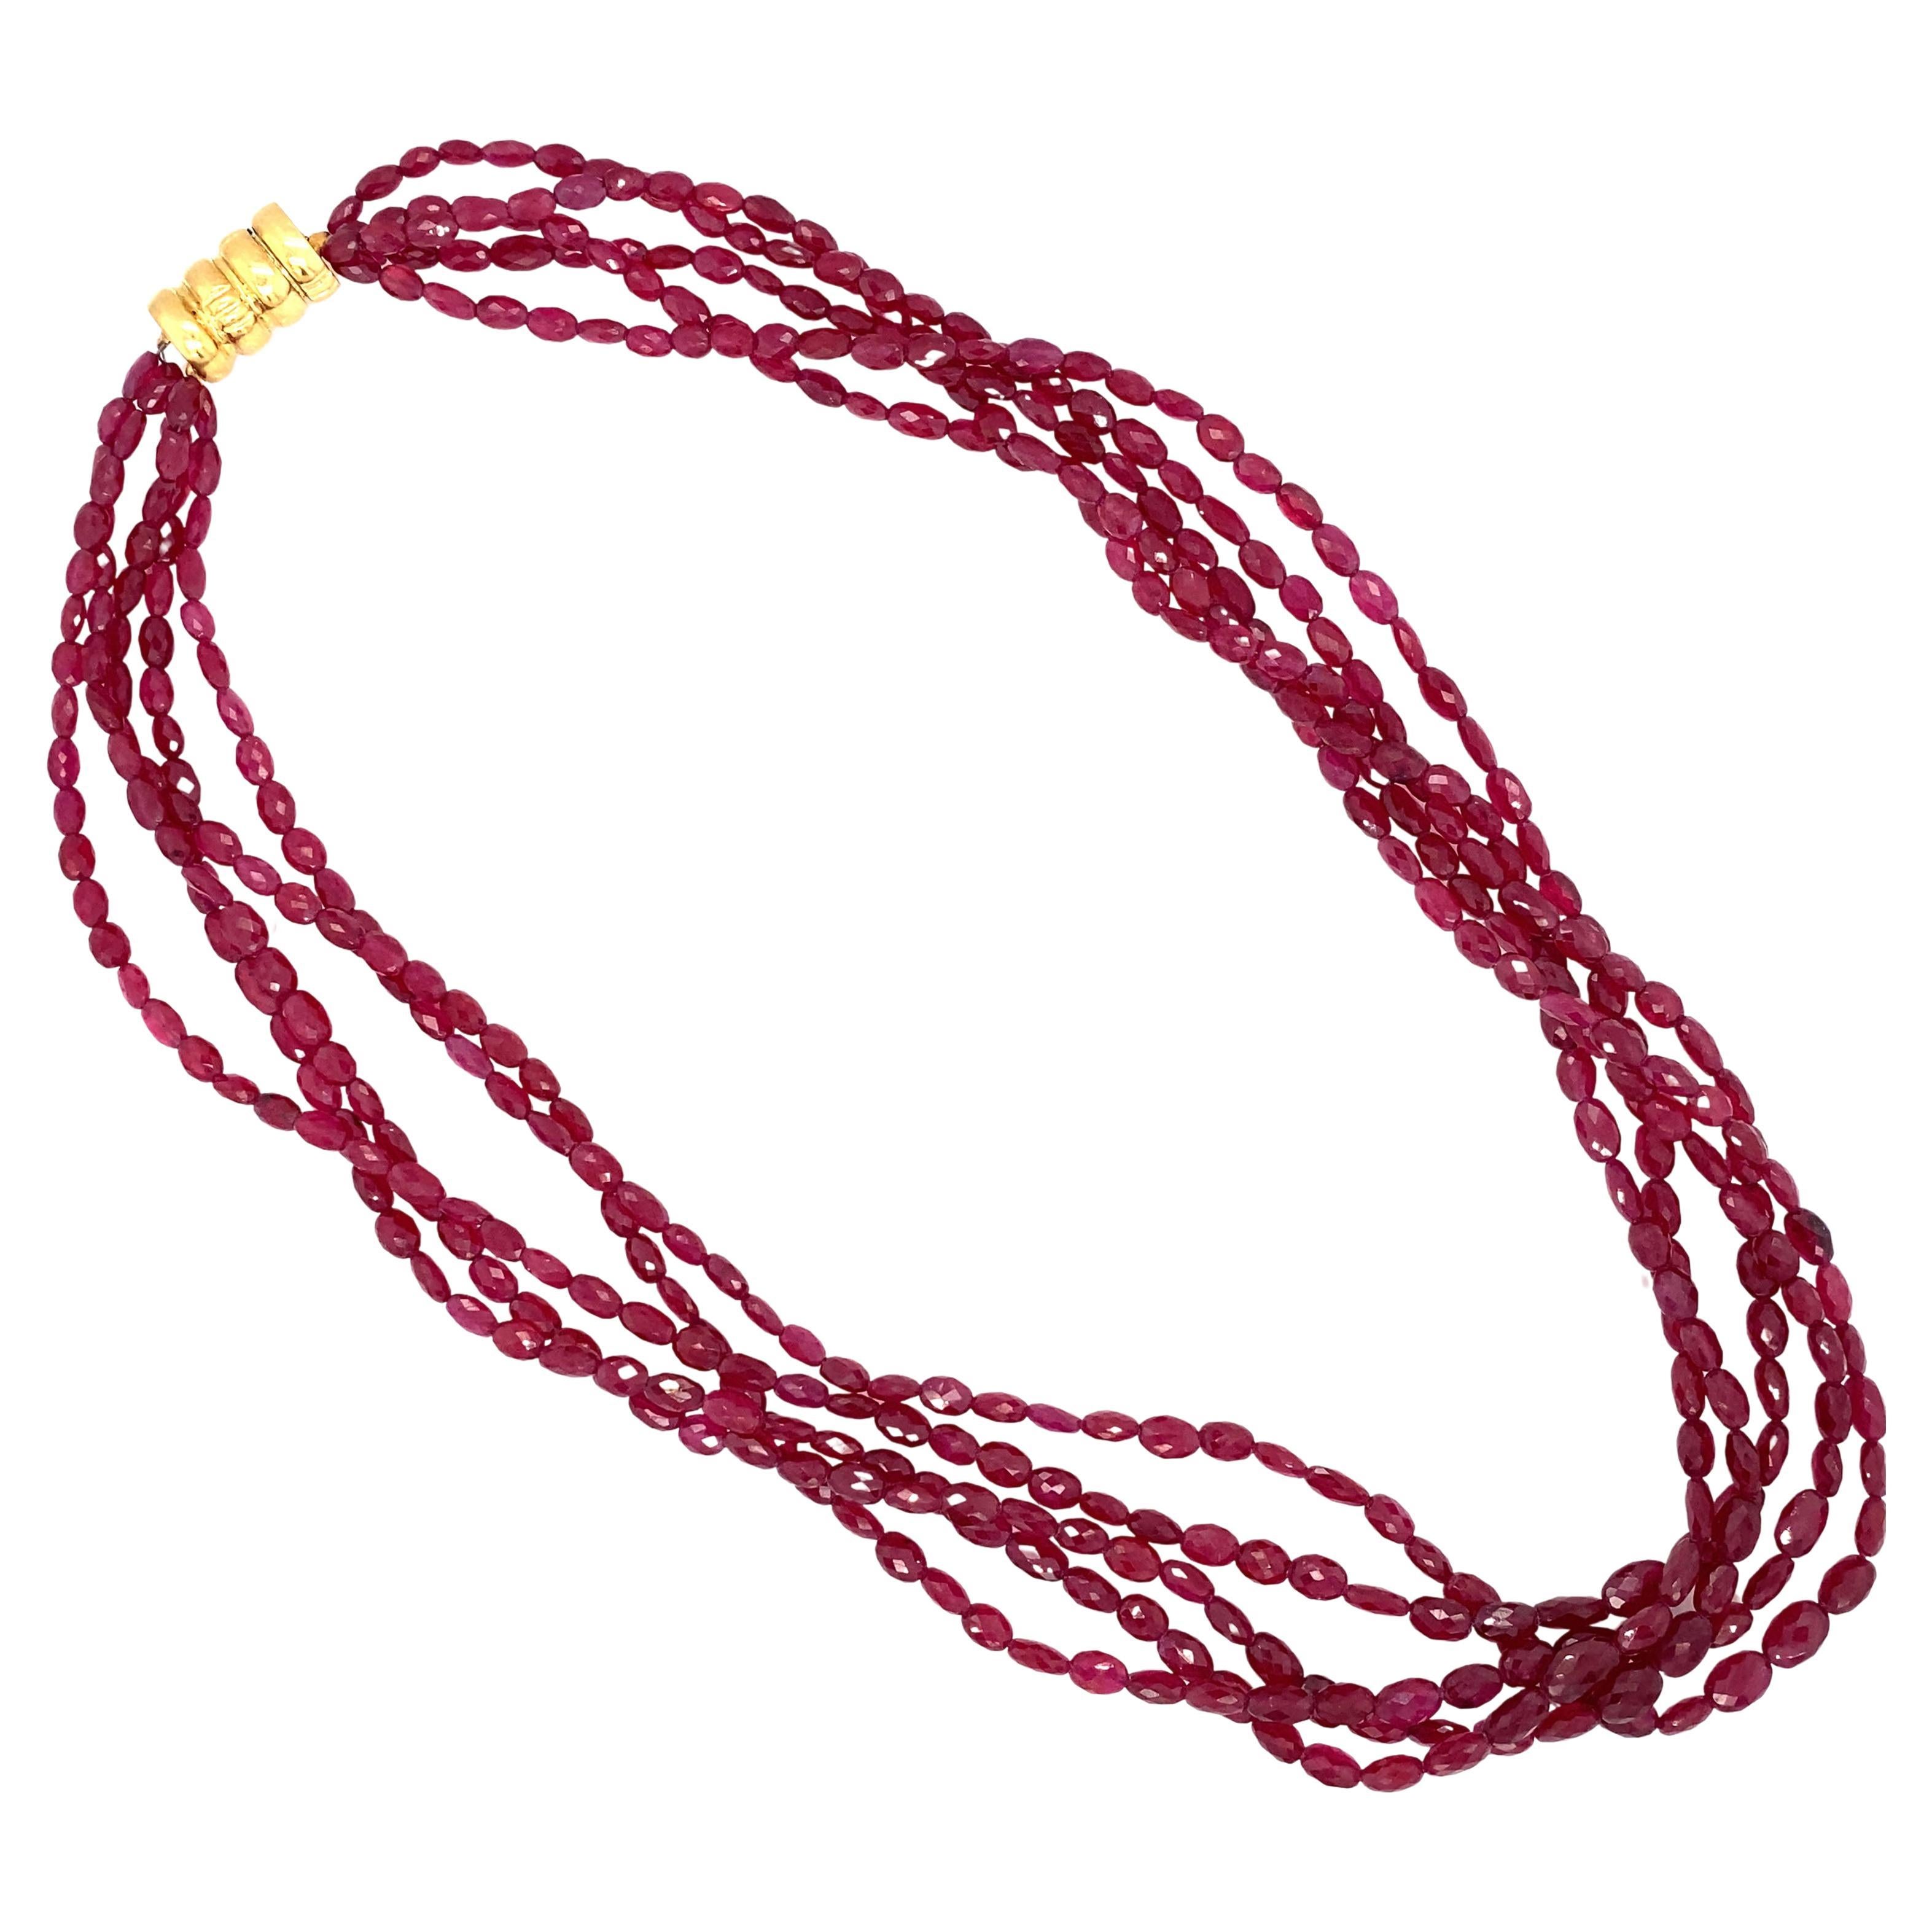 Five Strand Faceted Ruby Bead Necklace with 18 Karat Gold Magnetic Clasp